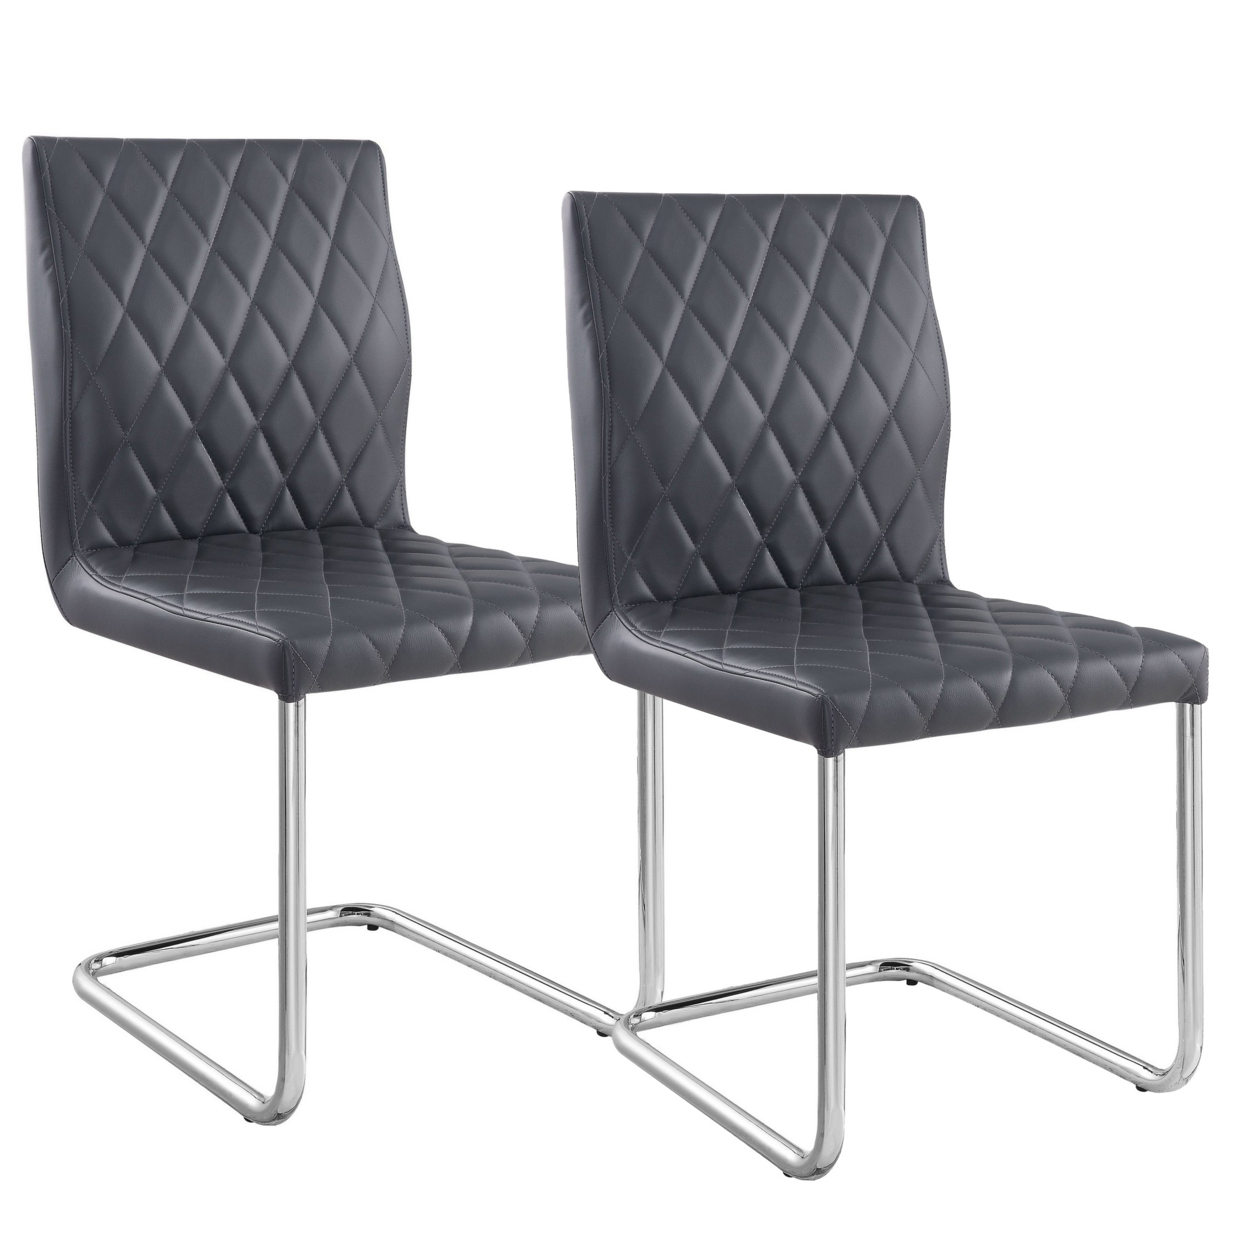 Metal Side Chairs With Faux Leather Seat And Back, Set Of 2, Gray And Silver- Saltoro Sherpi